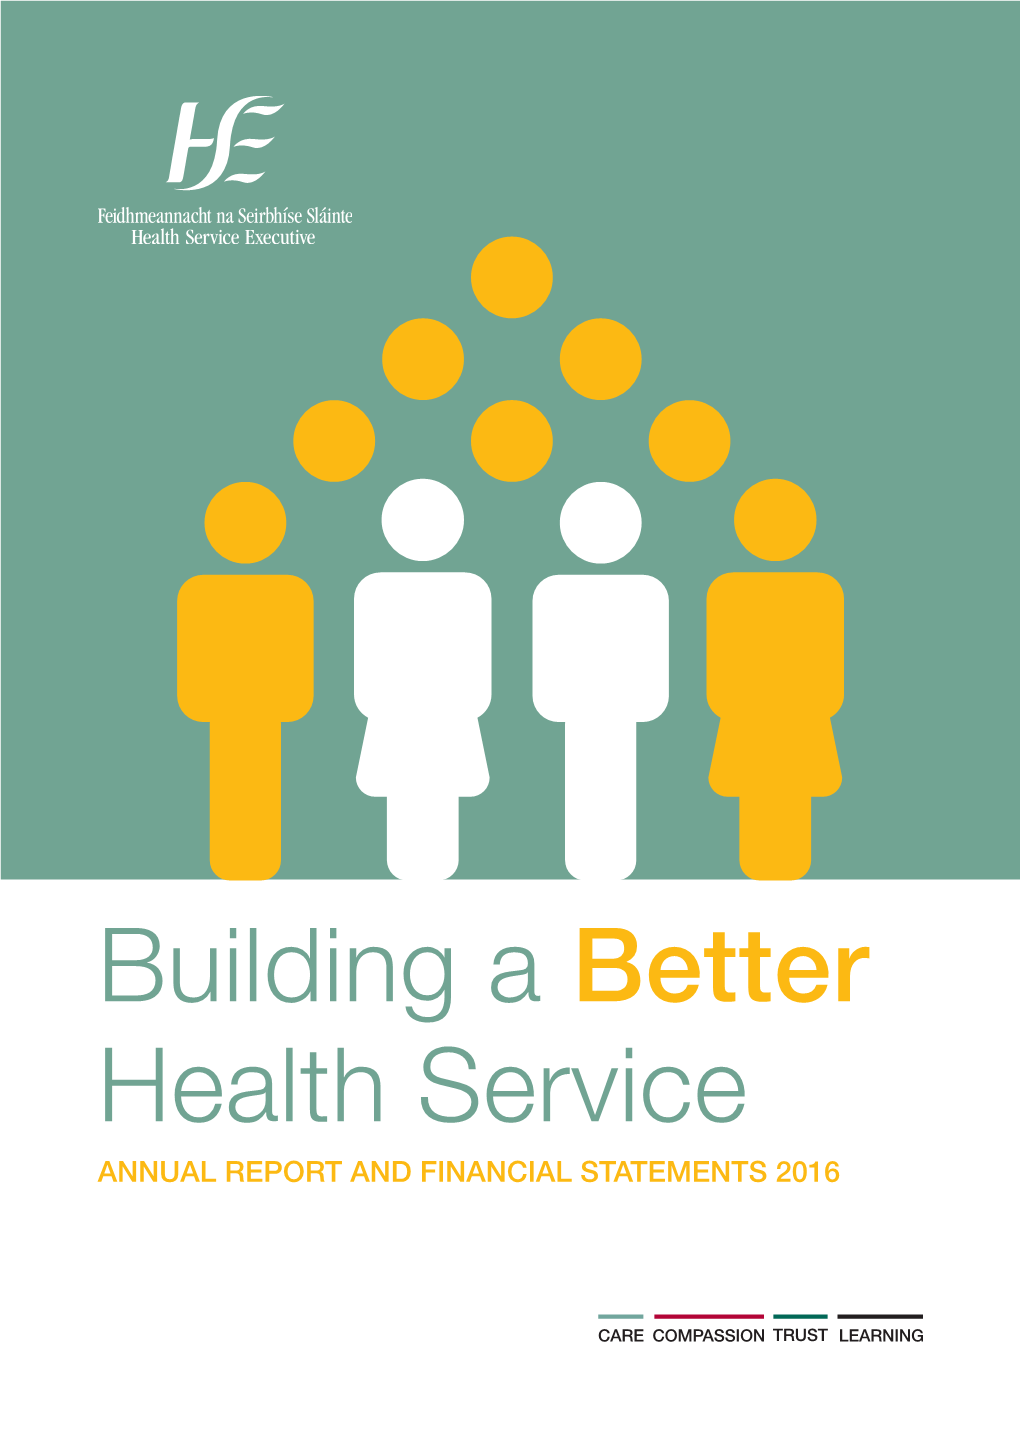 Health Service Executive Annual Report and Financial Statements 2016